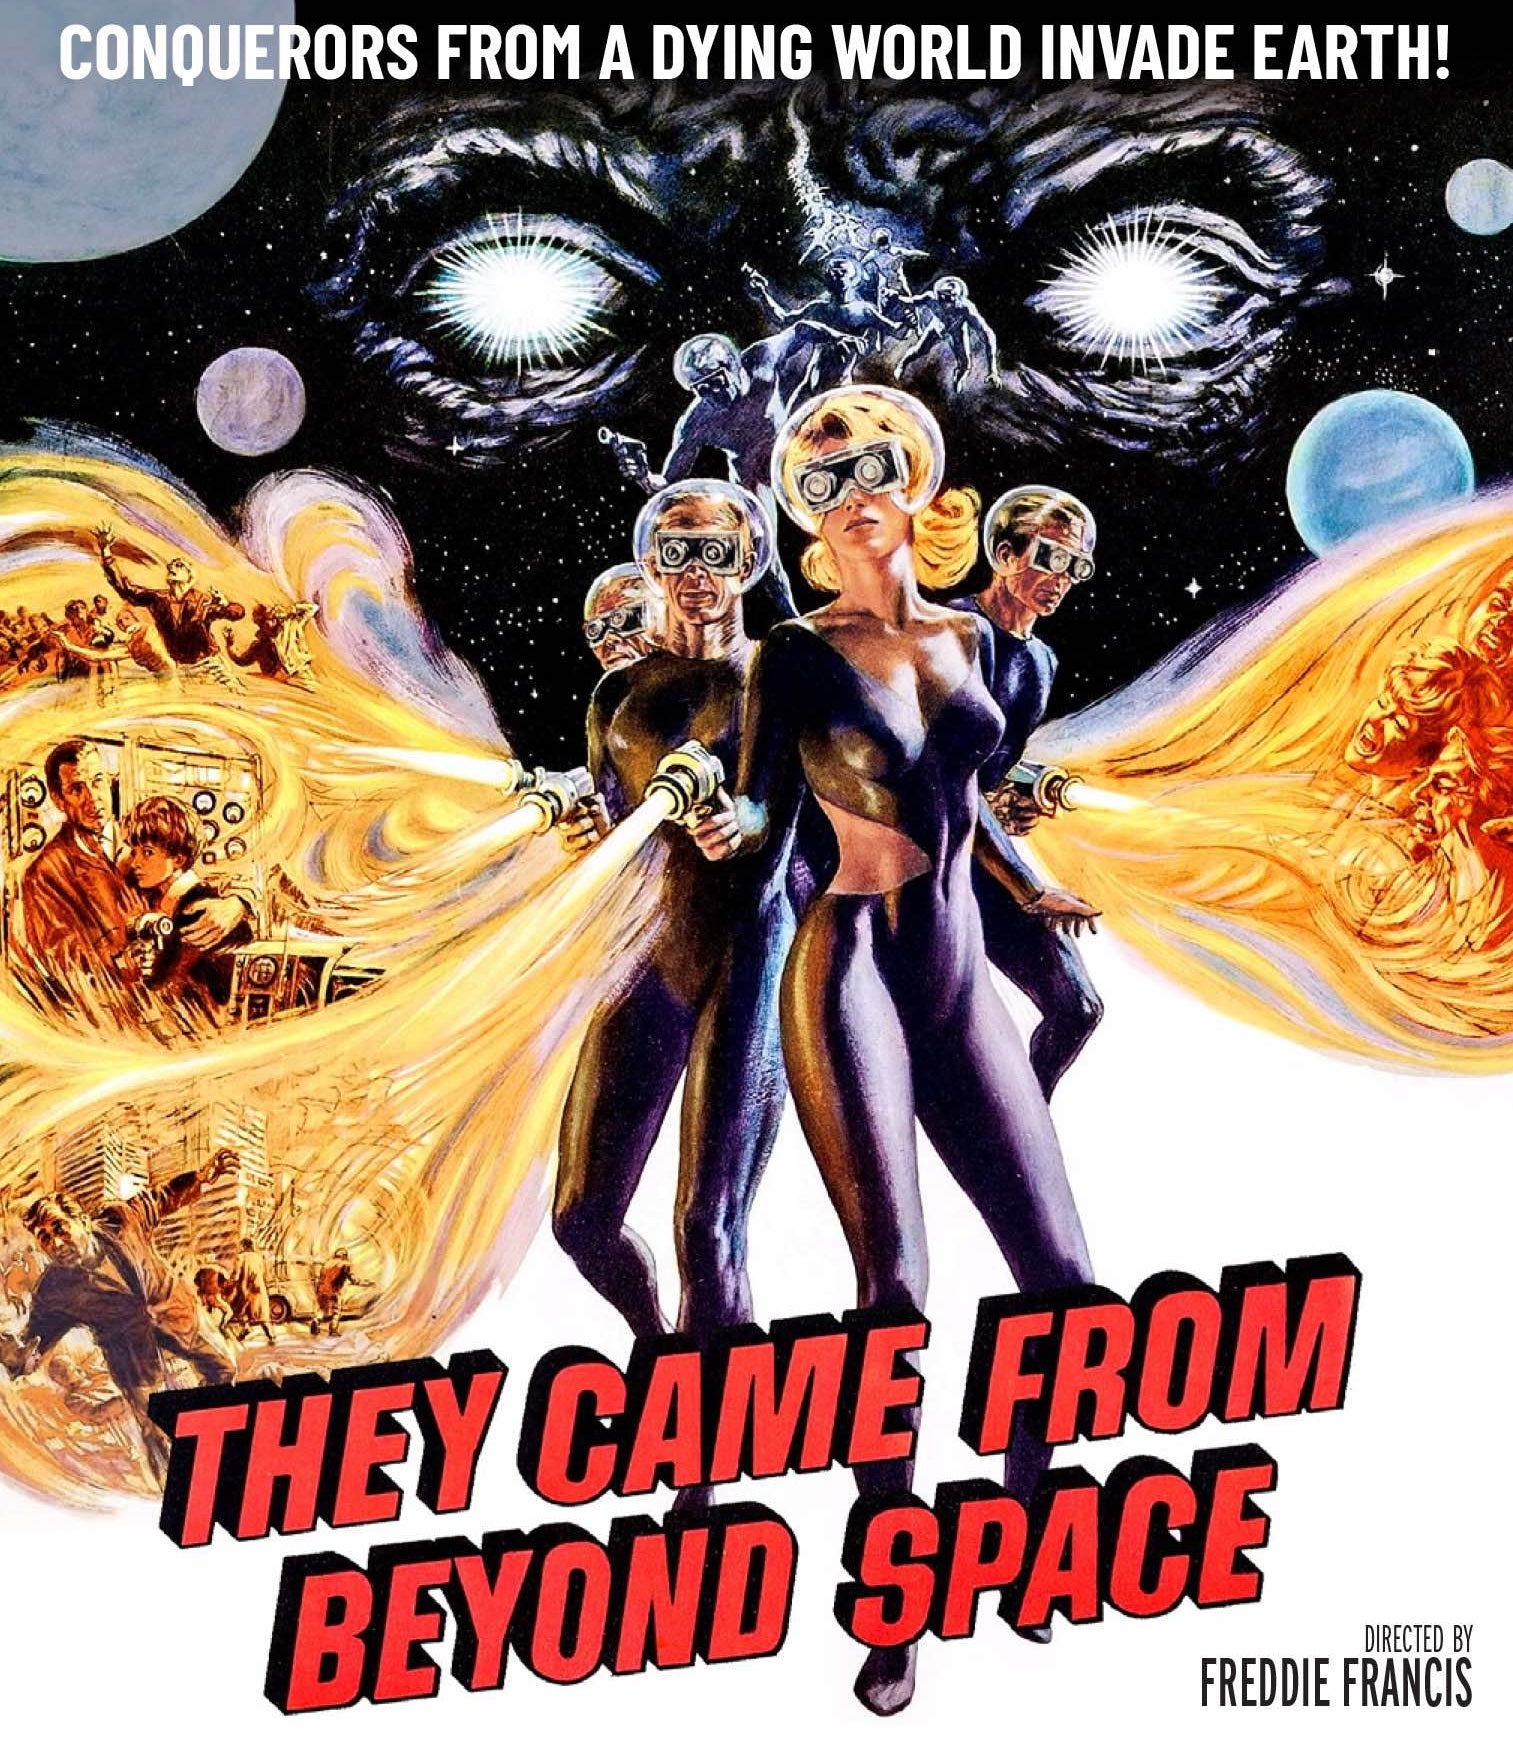 THEY CAME FROM BEYOND SPACE BLU-RAY